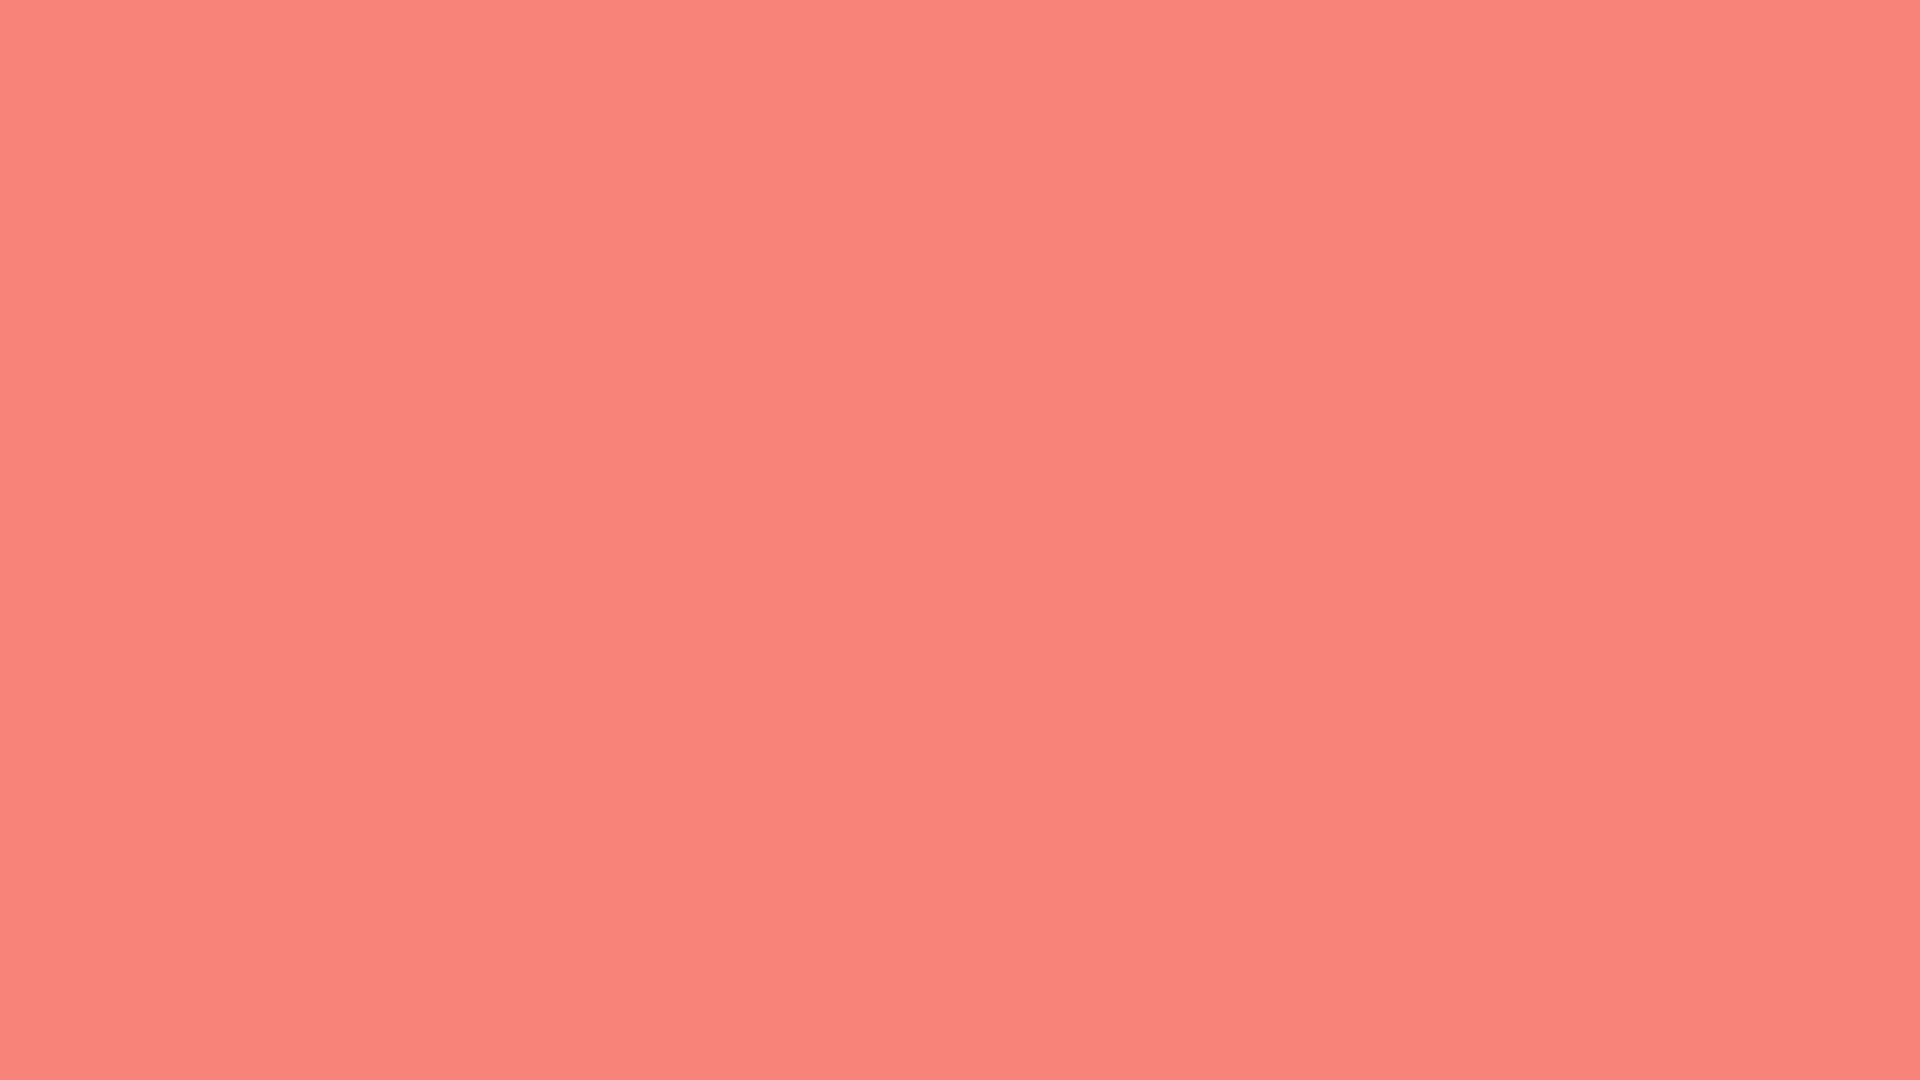 Coral Pink Color Codes The Hex, RGB And CMYK Values That You Need | vlr ...